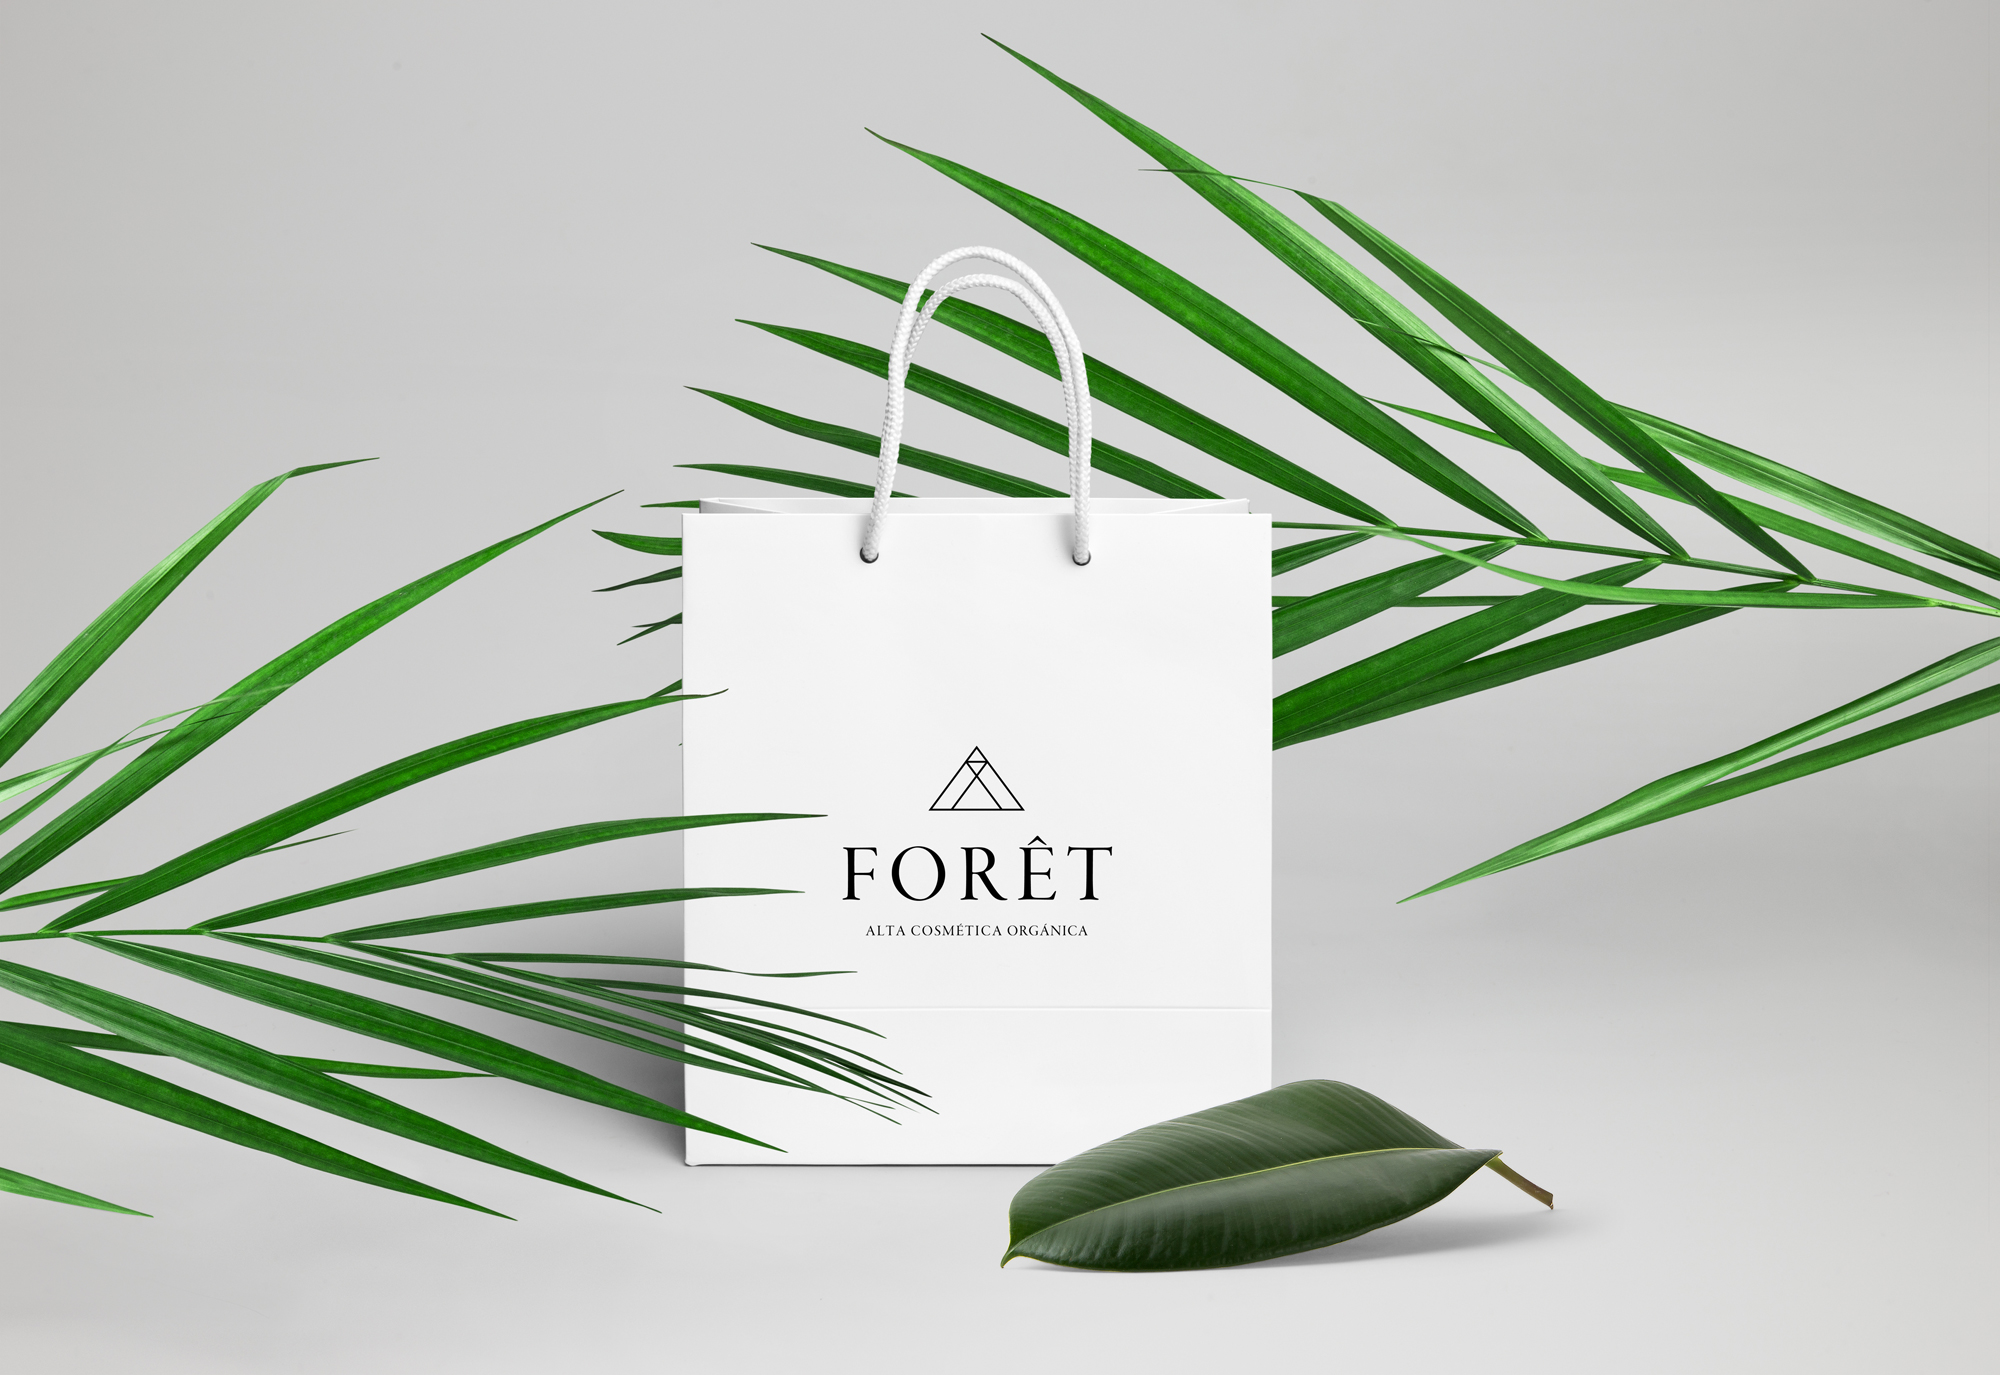 Foret Cosmeticos